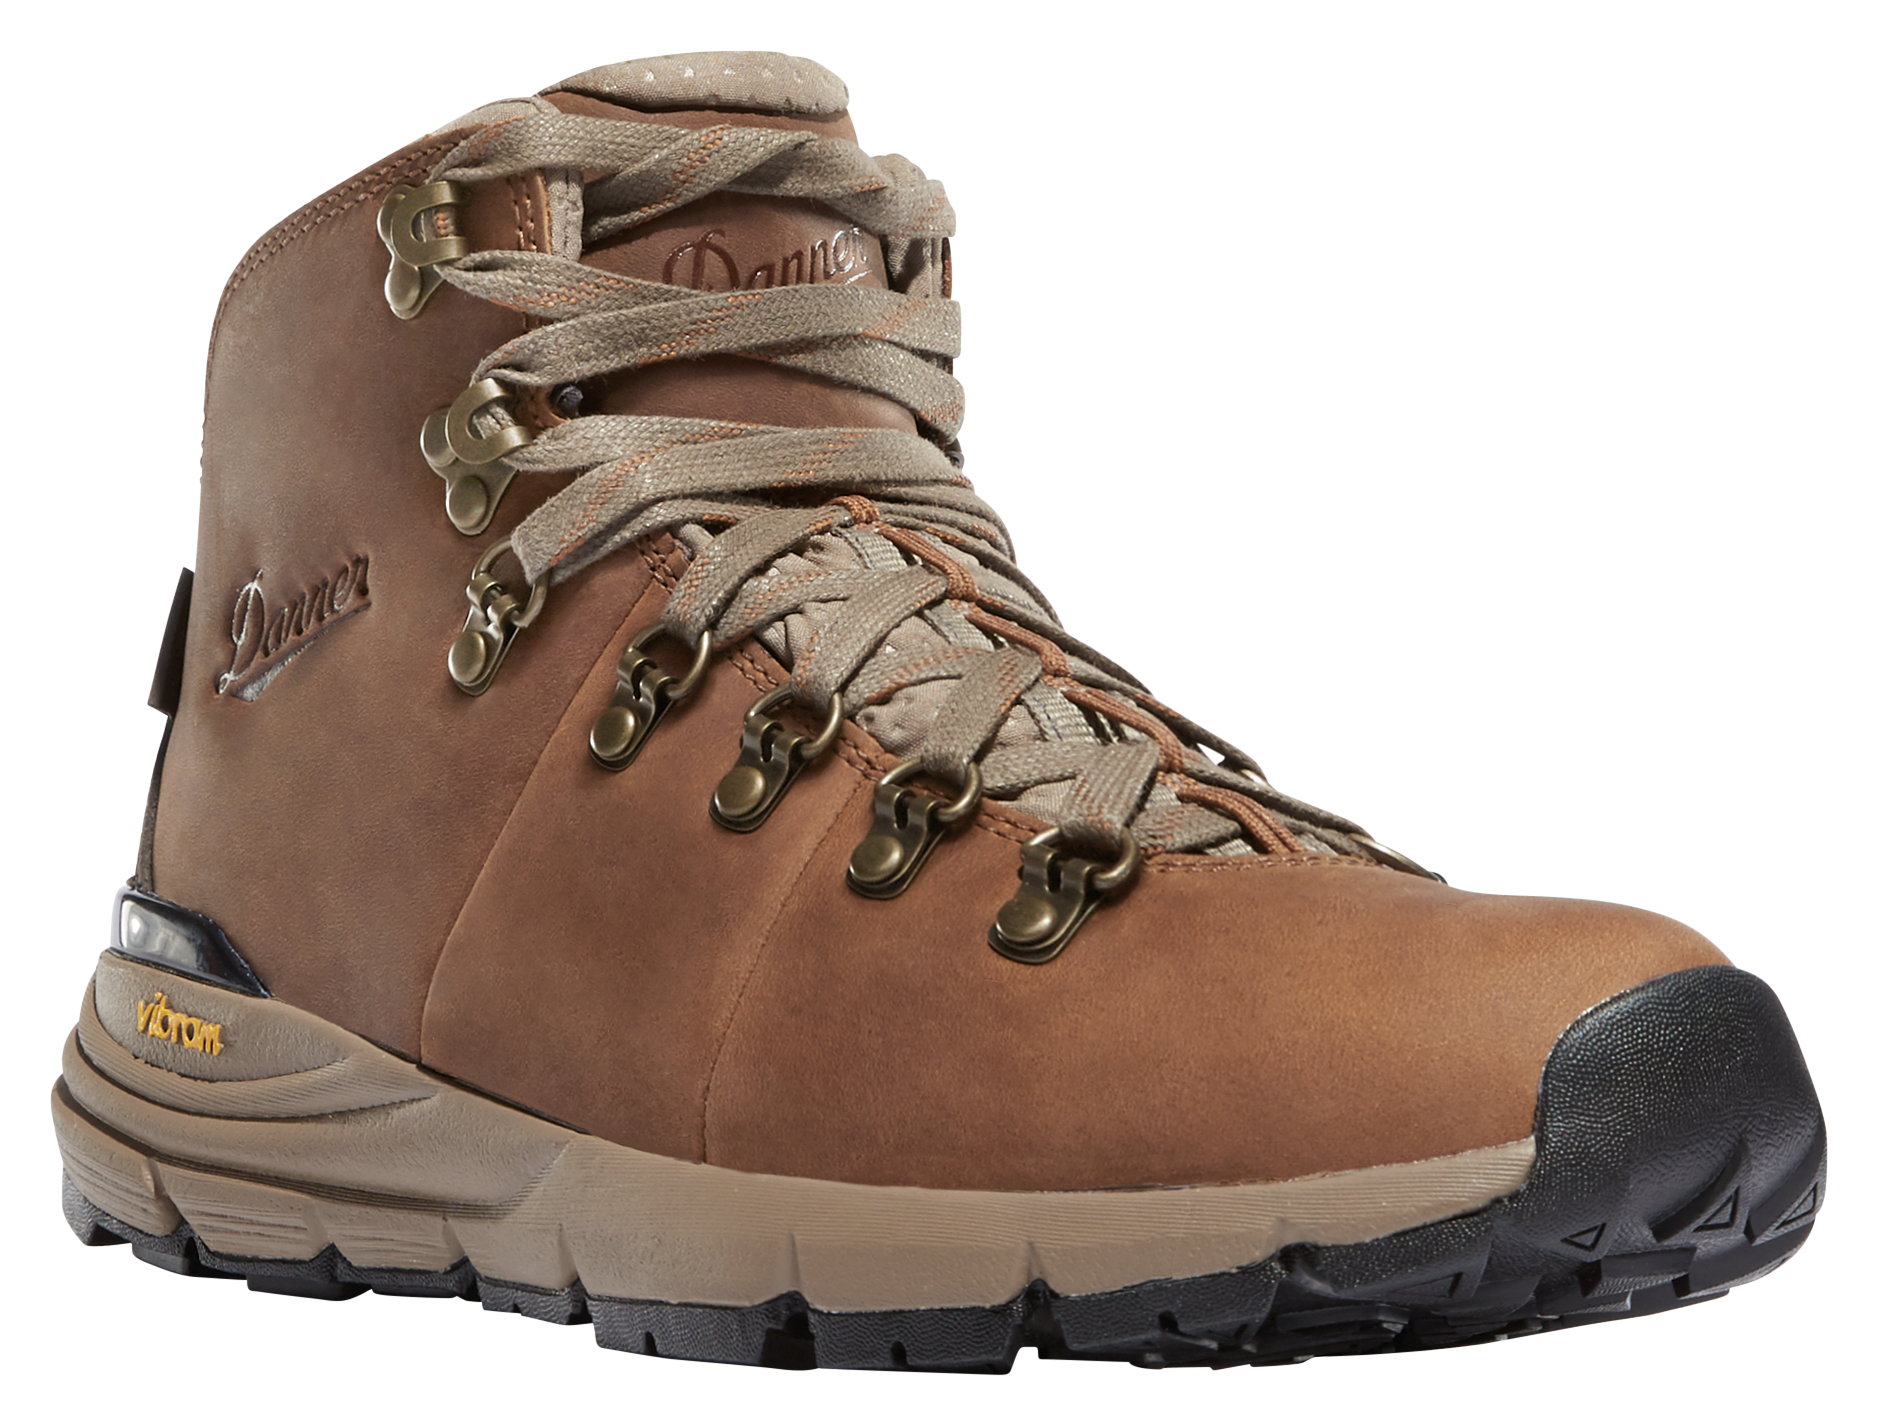 Danner Mountain 600 Leather Waterproof Hiking Boots for Ladies - Rich Brown - 8.5M